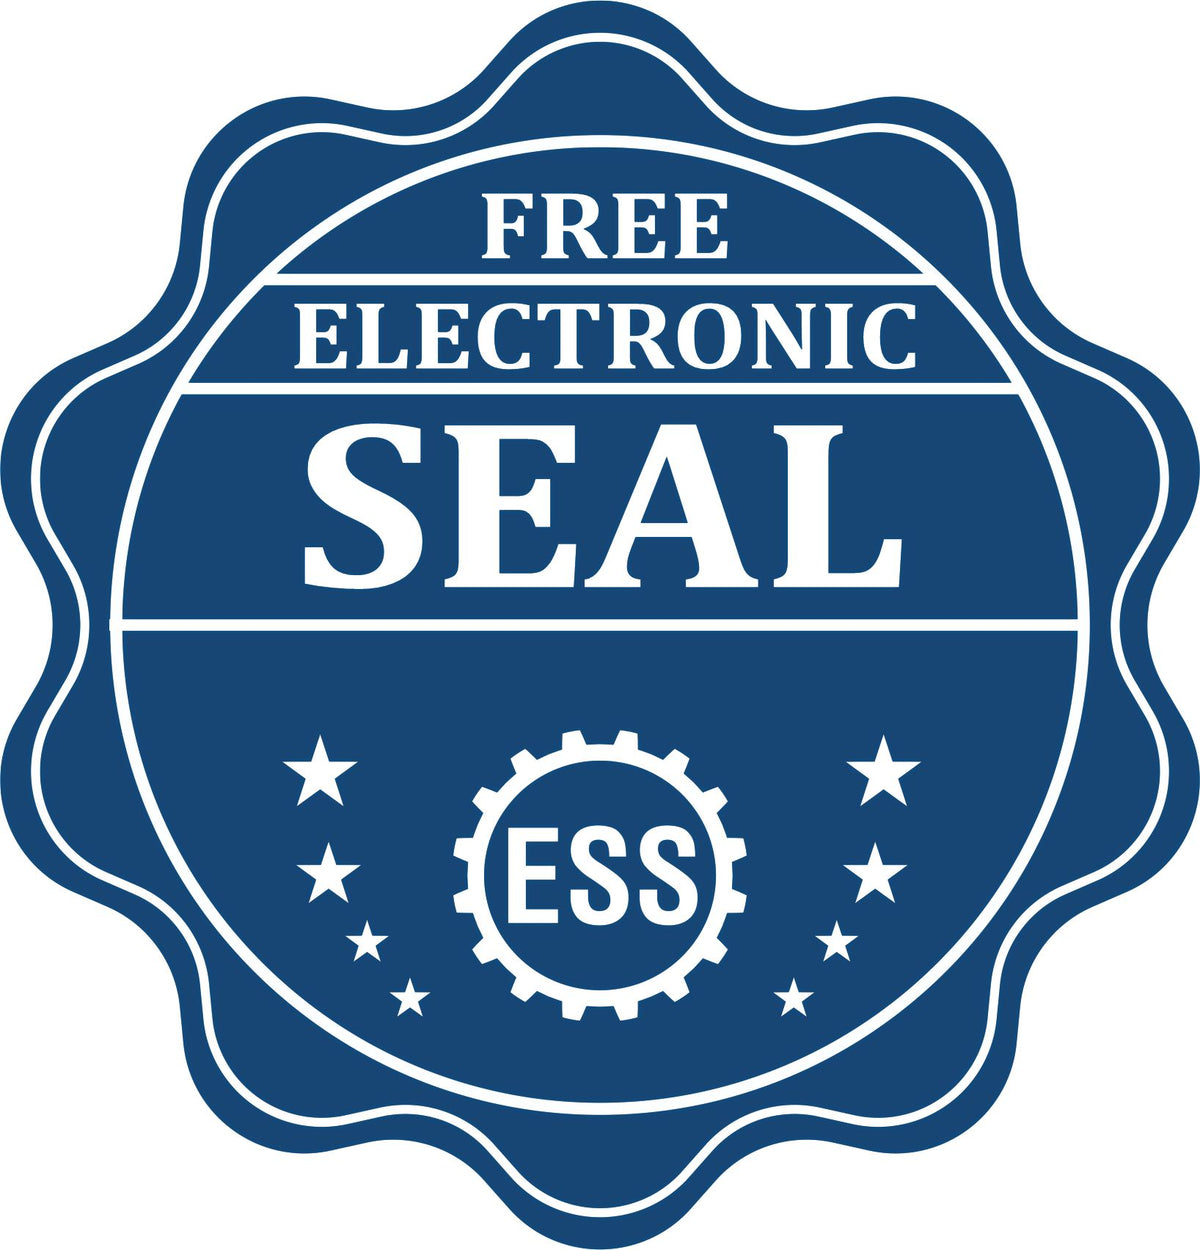 A badge showing a free electronic seal for the Alabama Desk Architect Embossing Seal with stars and the ESS gear on the emblem.